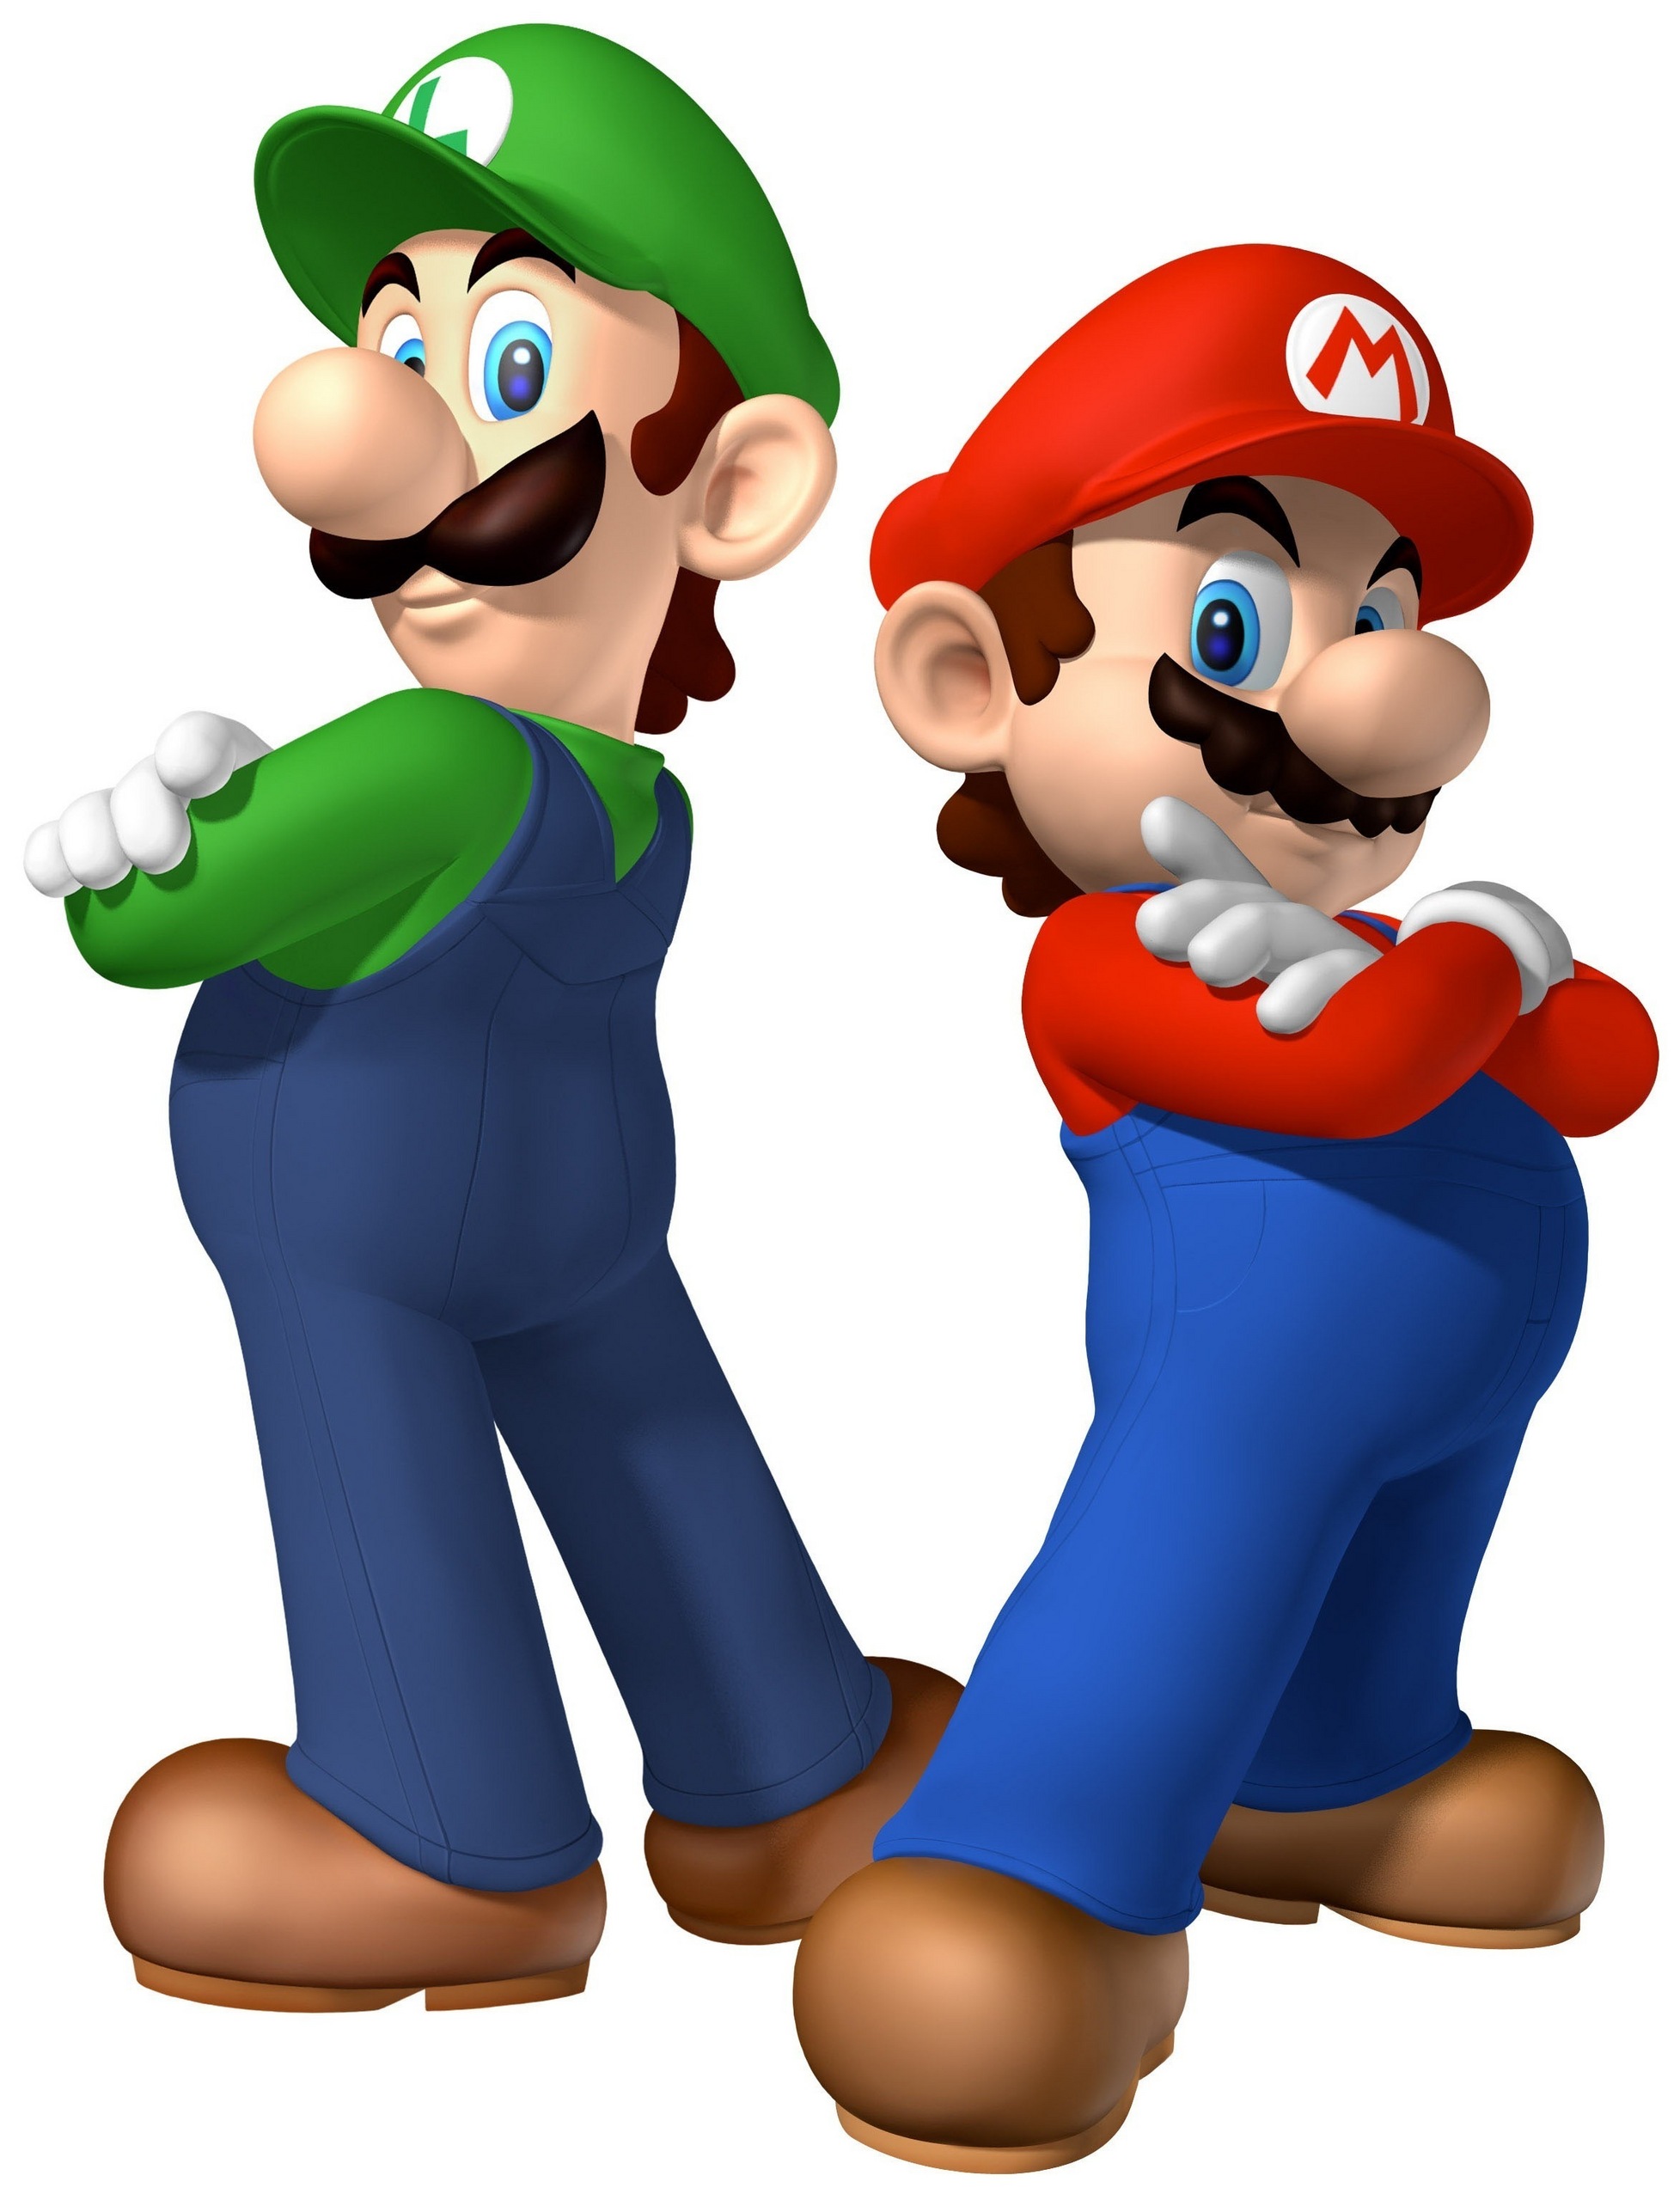 List of Mario games - The Nintendo Wiki - Wii, Nintendo DS, and 